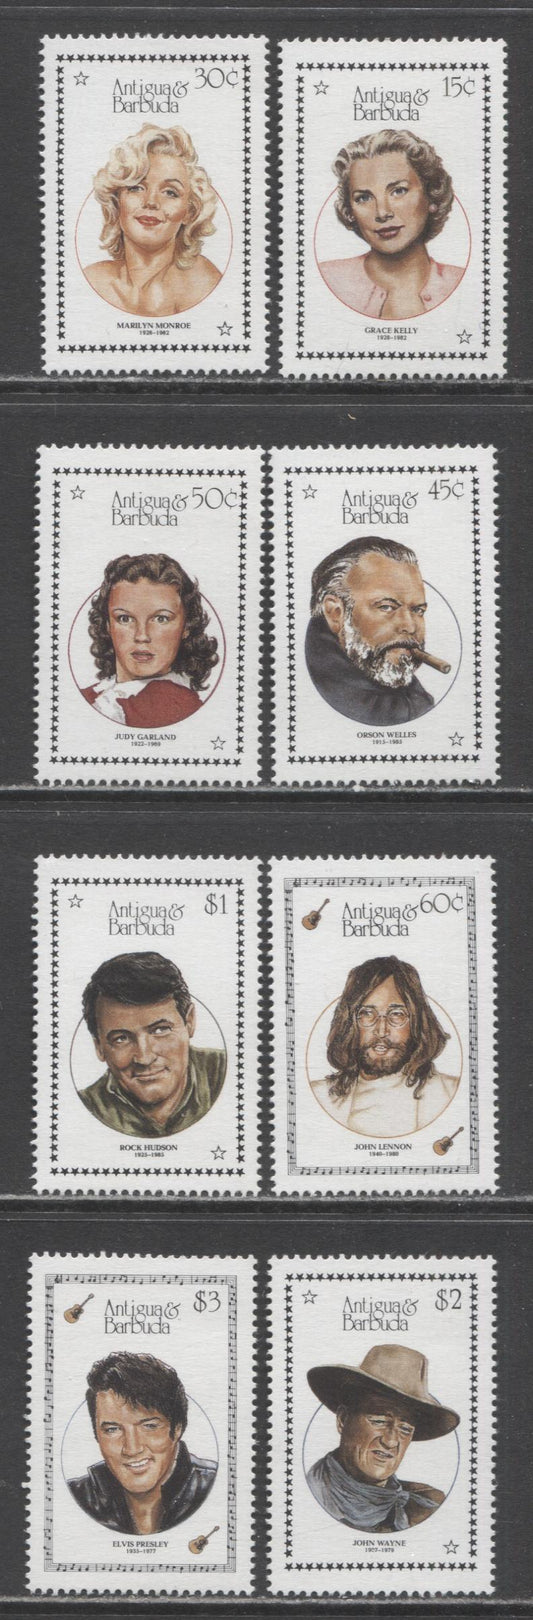 Lot 139 Antigua SC#1040-1047 1987 Entertainers Issue, 8 VFNH Singles, Click on Listing to See ALL Pictures, 2017 Scott Cat. $25.05